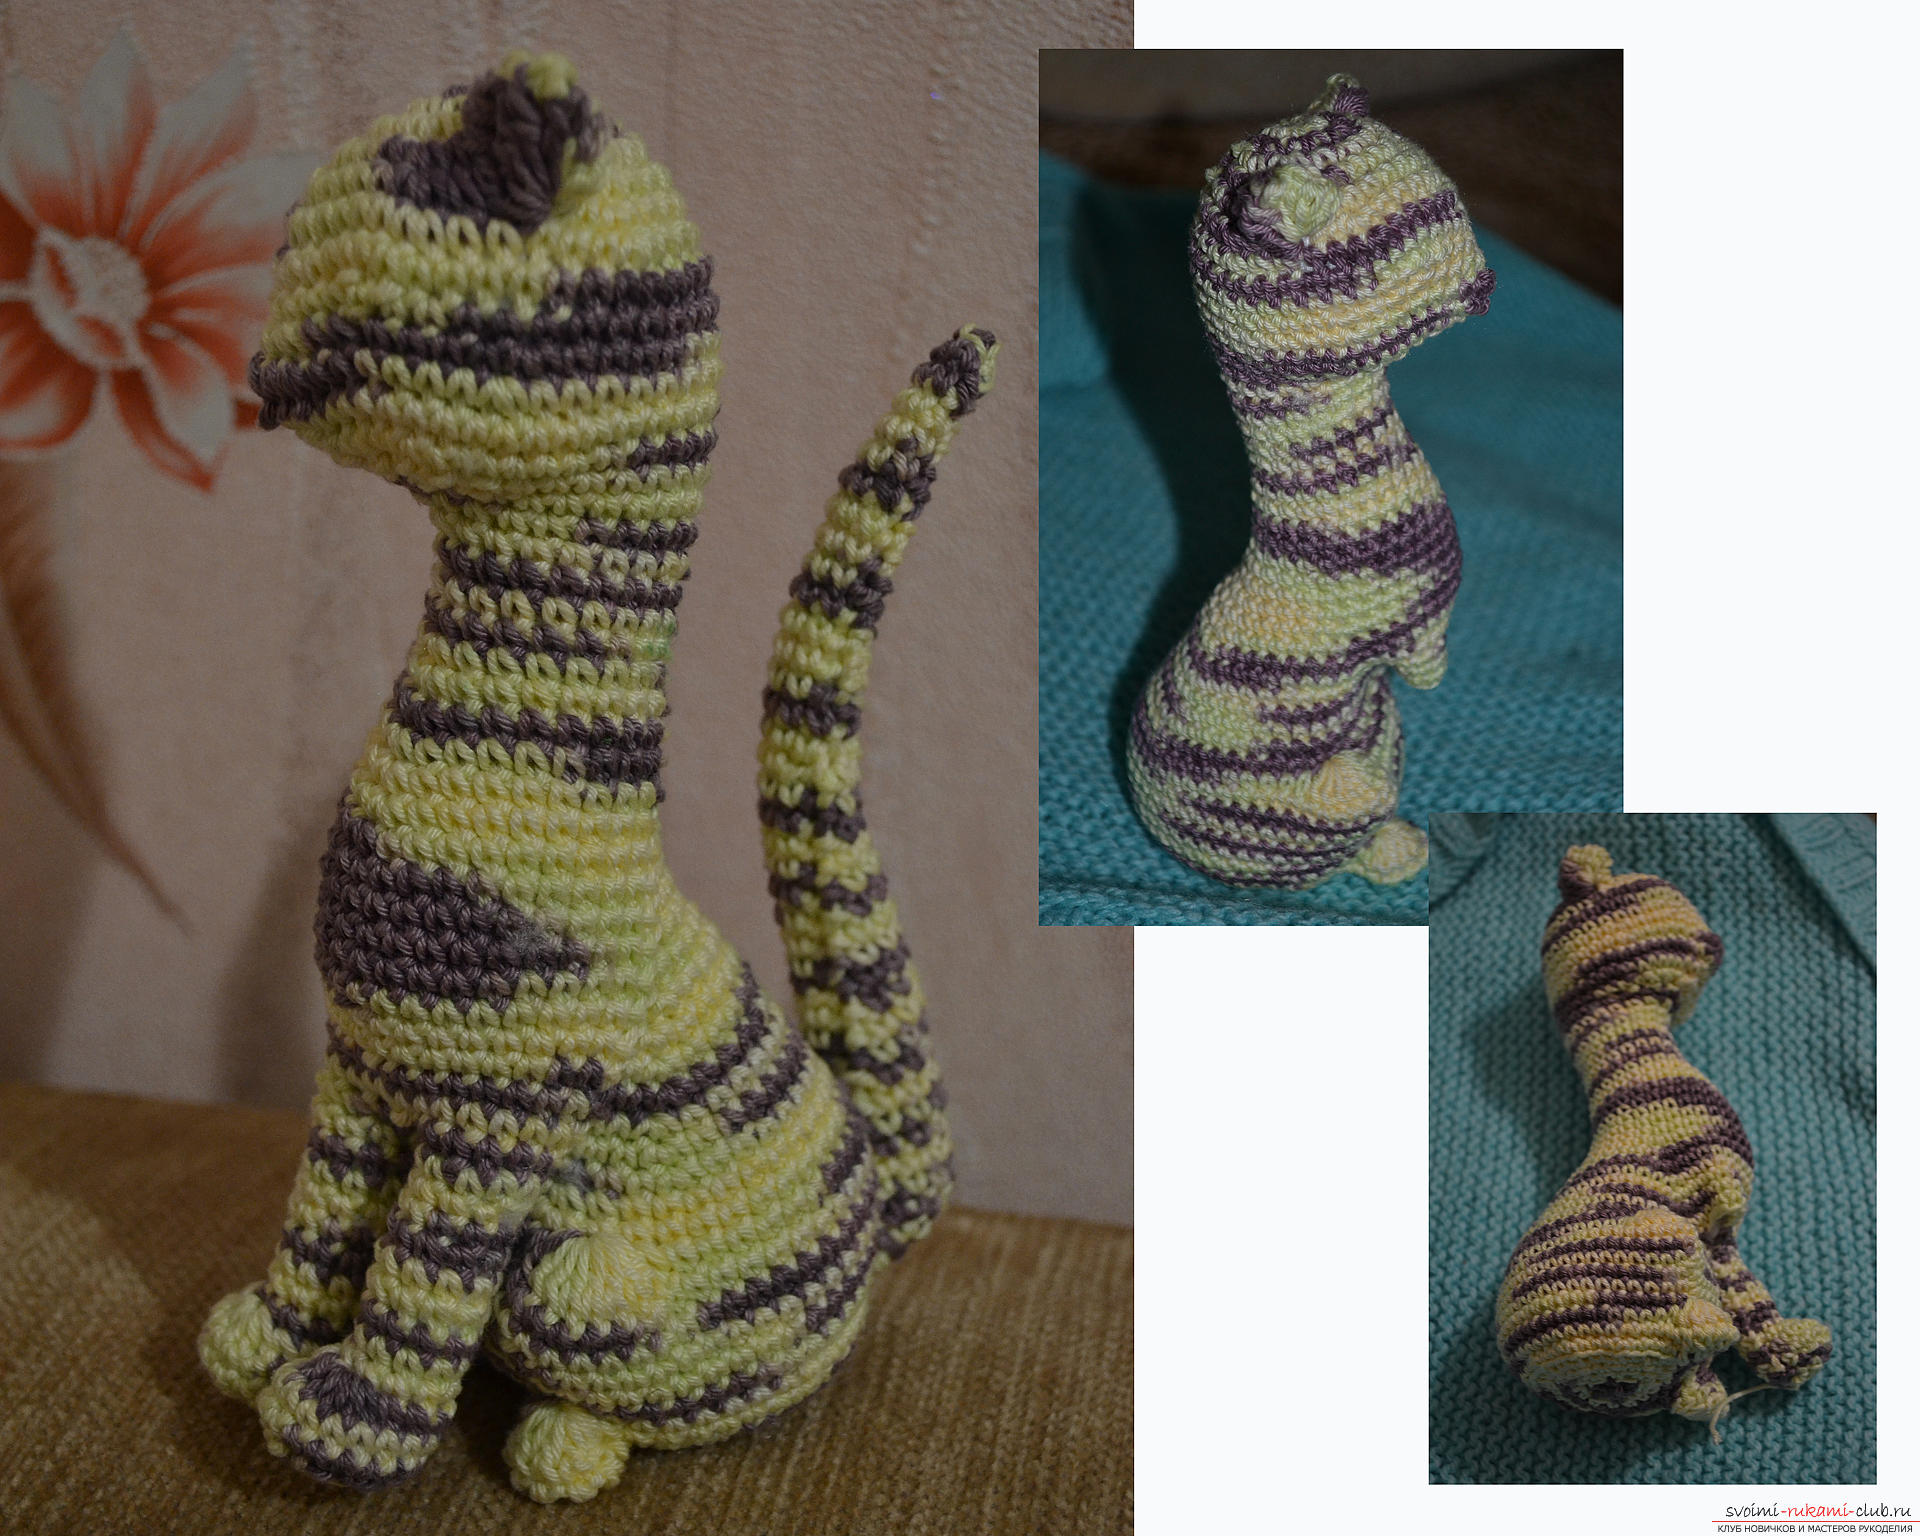 This master class crochet with a photo and diagram will teach how to tie a beautiful cat .. Photo # 1